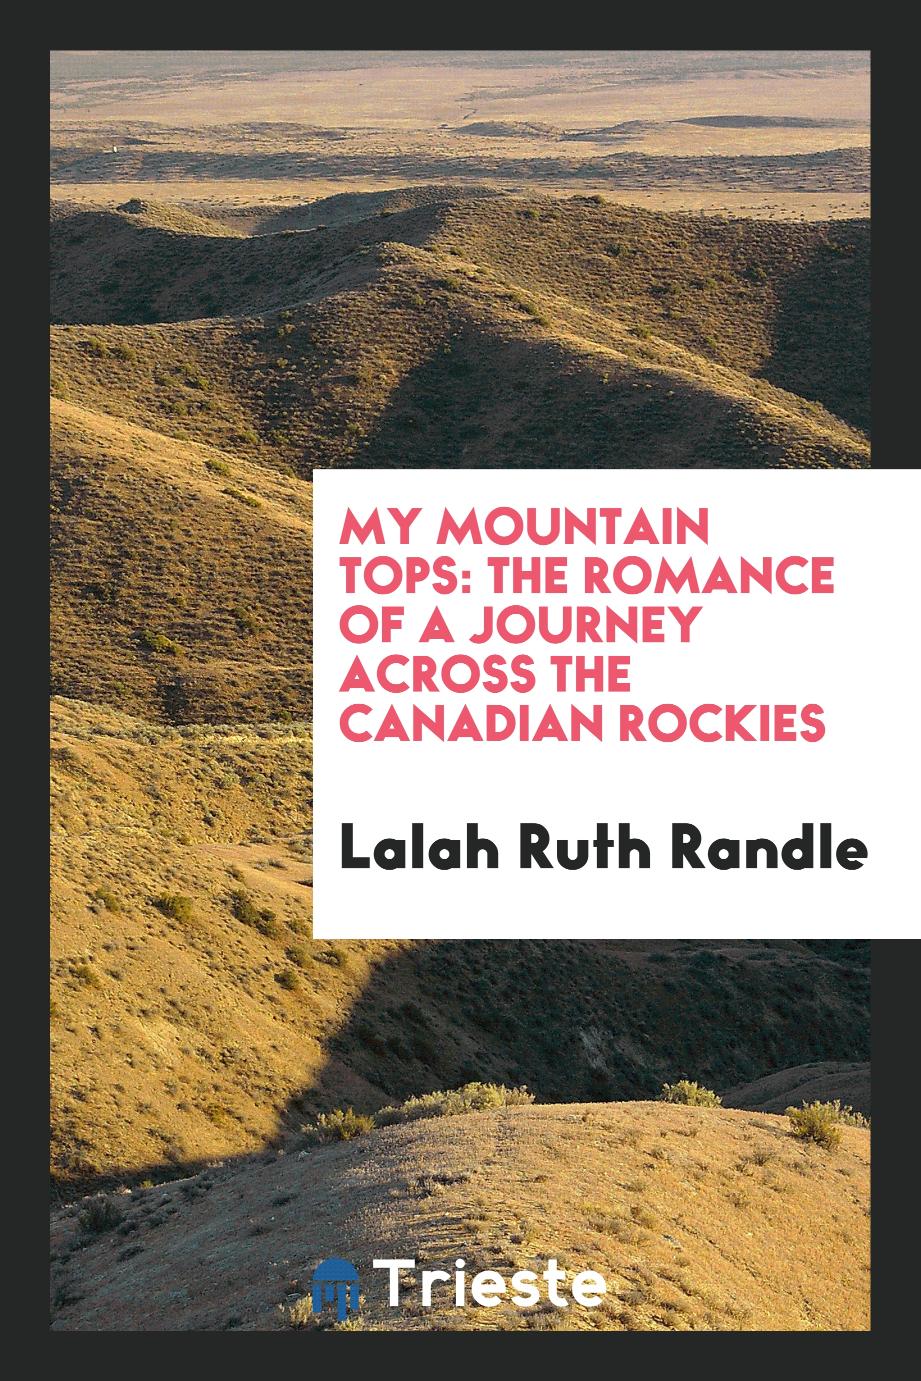 My mountain tops: the romance of a journey across the Canadian rockies